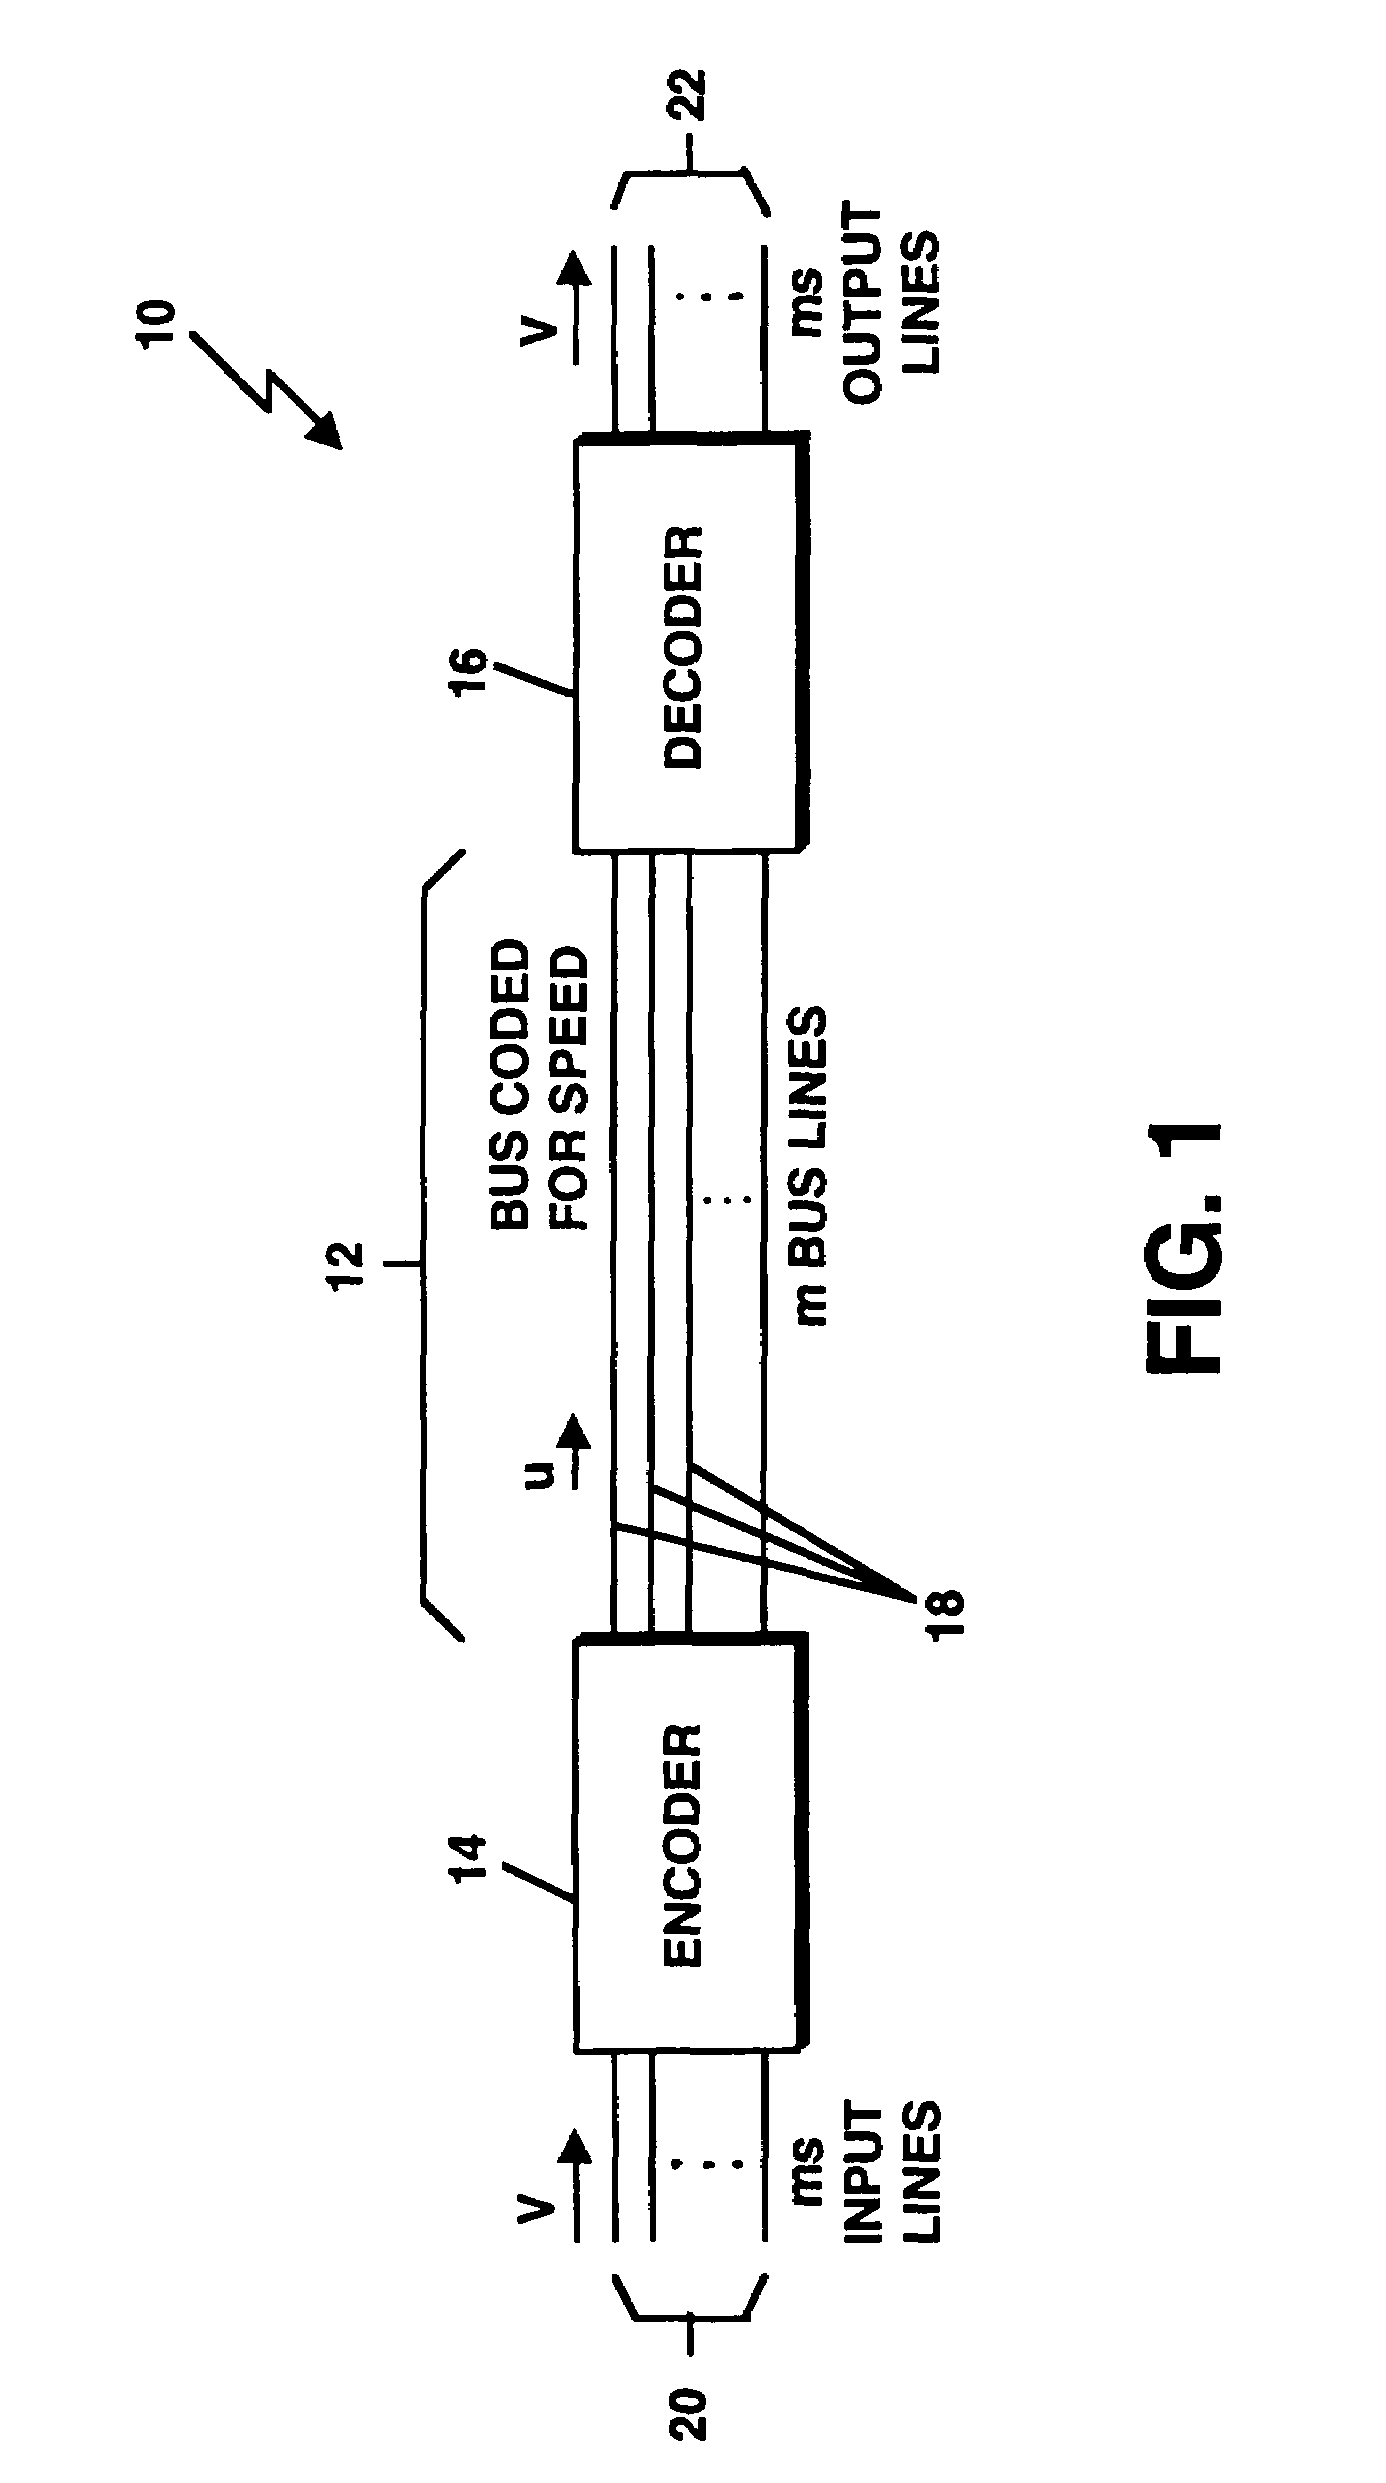 Method and apparatus for reducing delay in a bus provided from parallel, capacitively coupled transmission lines